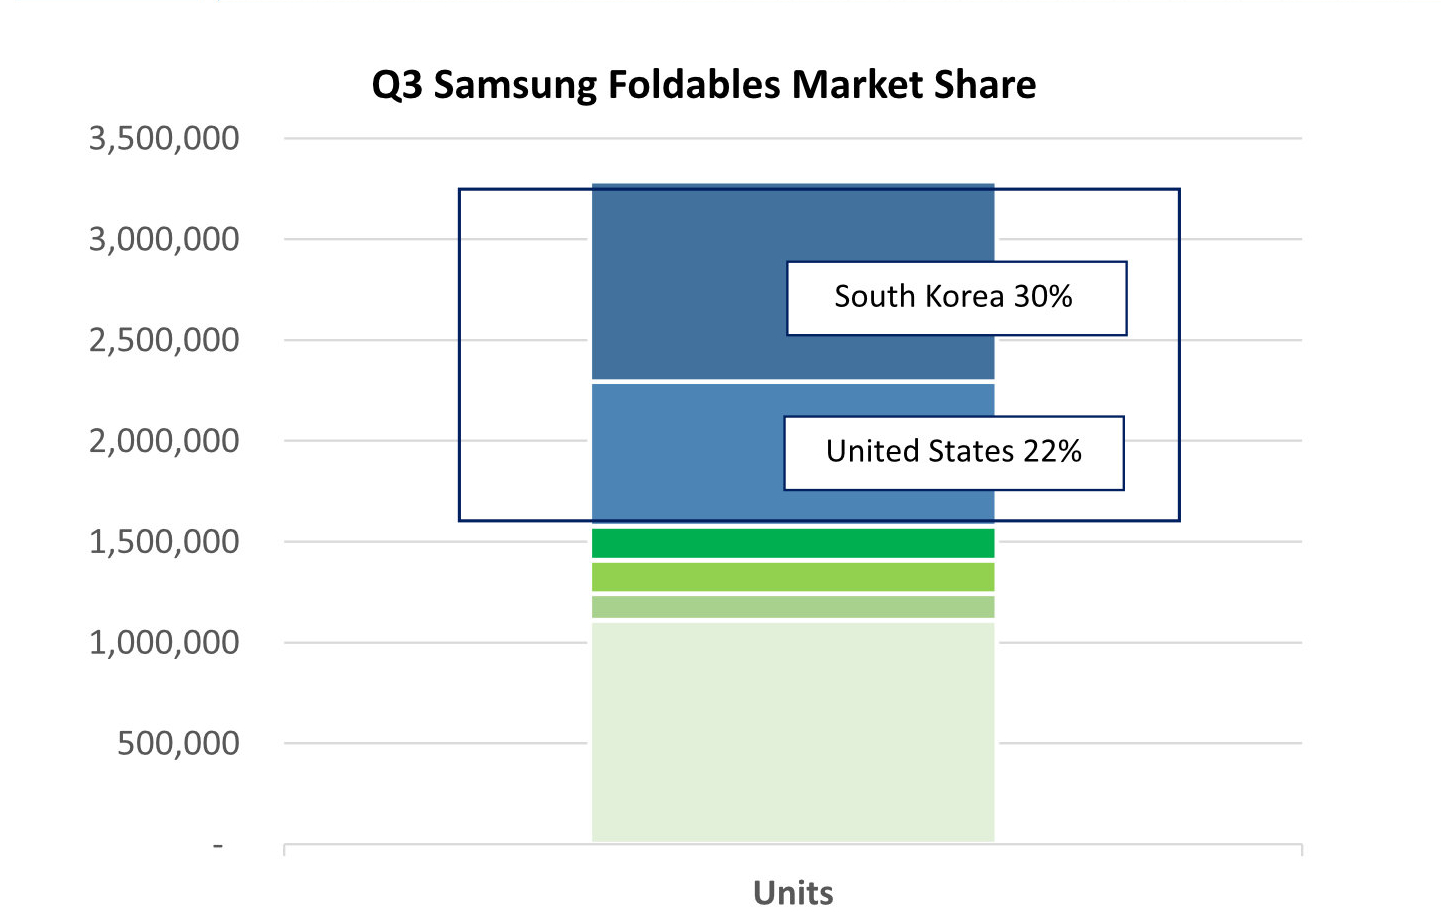 Can Samsung maintain its lead in the Android premium foldable segment?